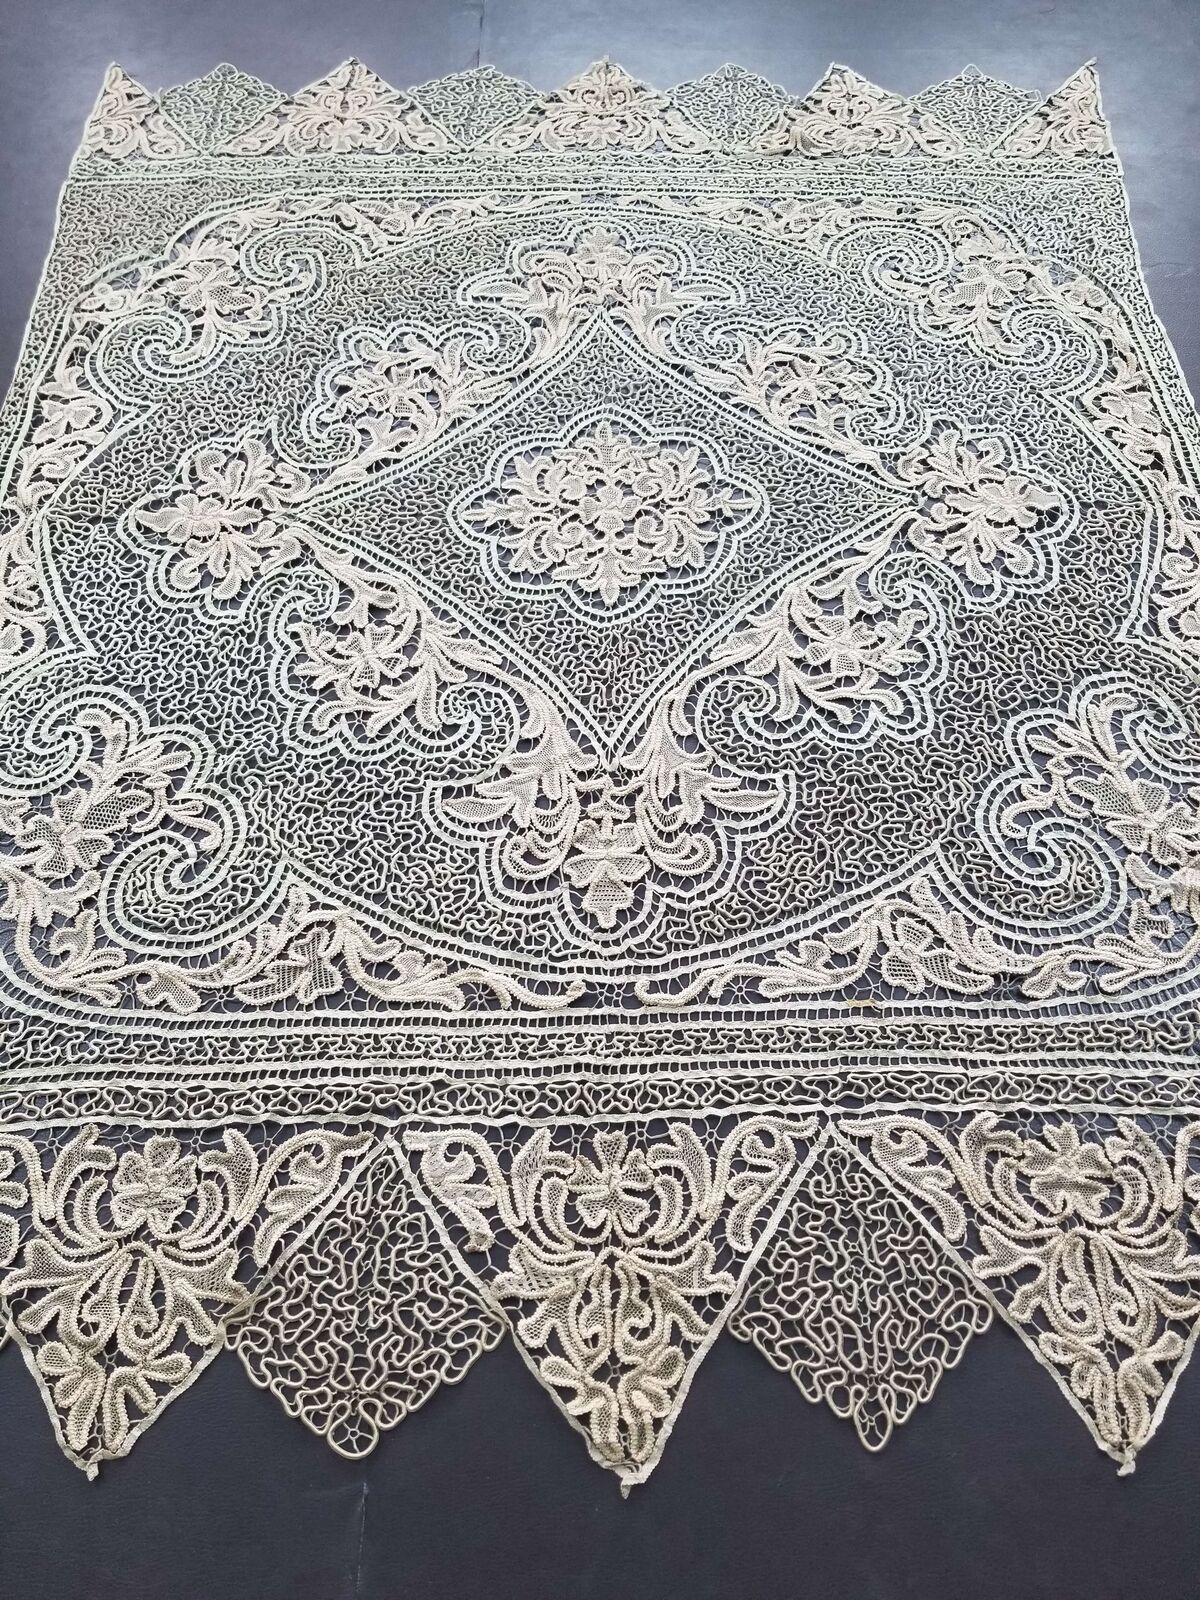 Antique hand made mixed lace tablecloth 226x176cm